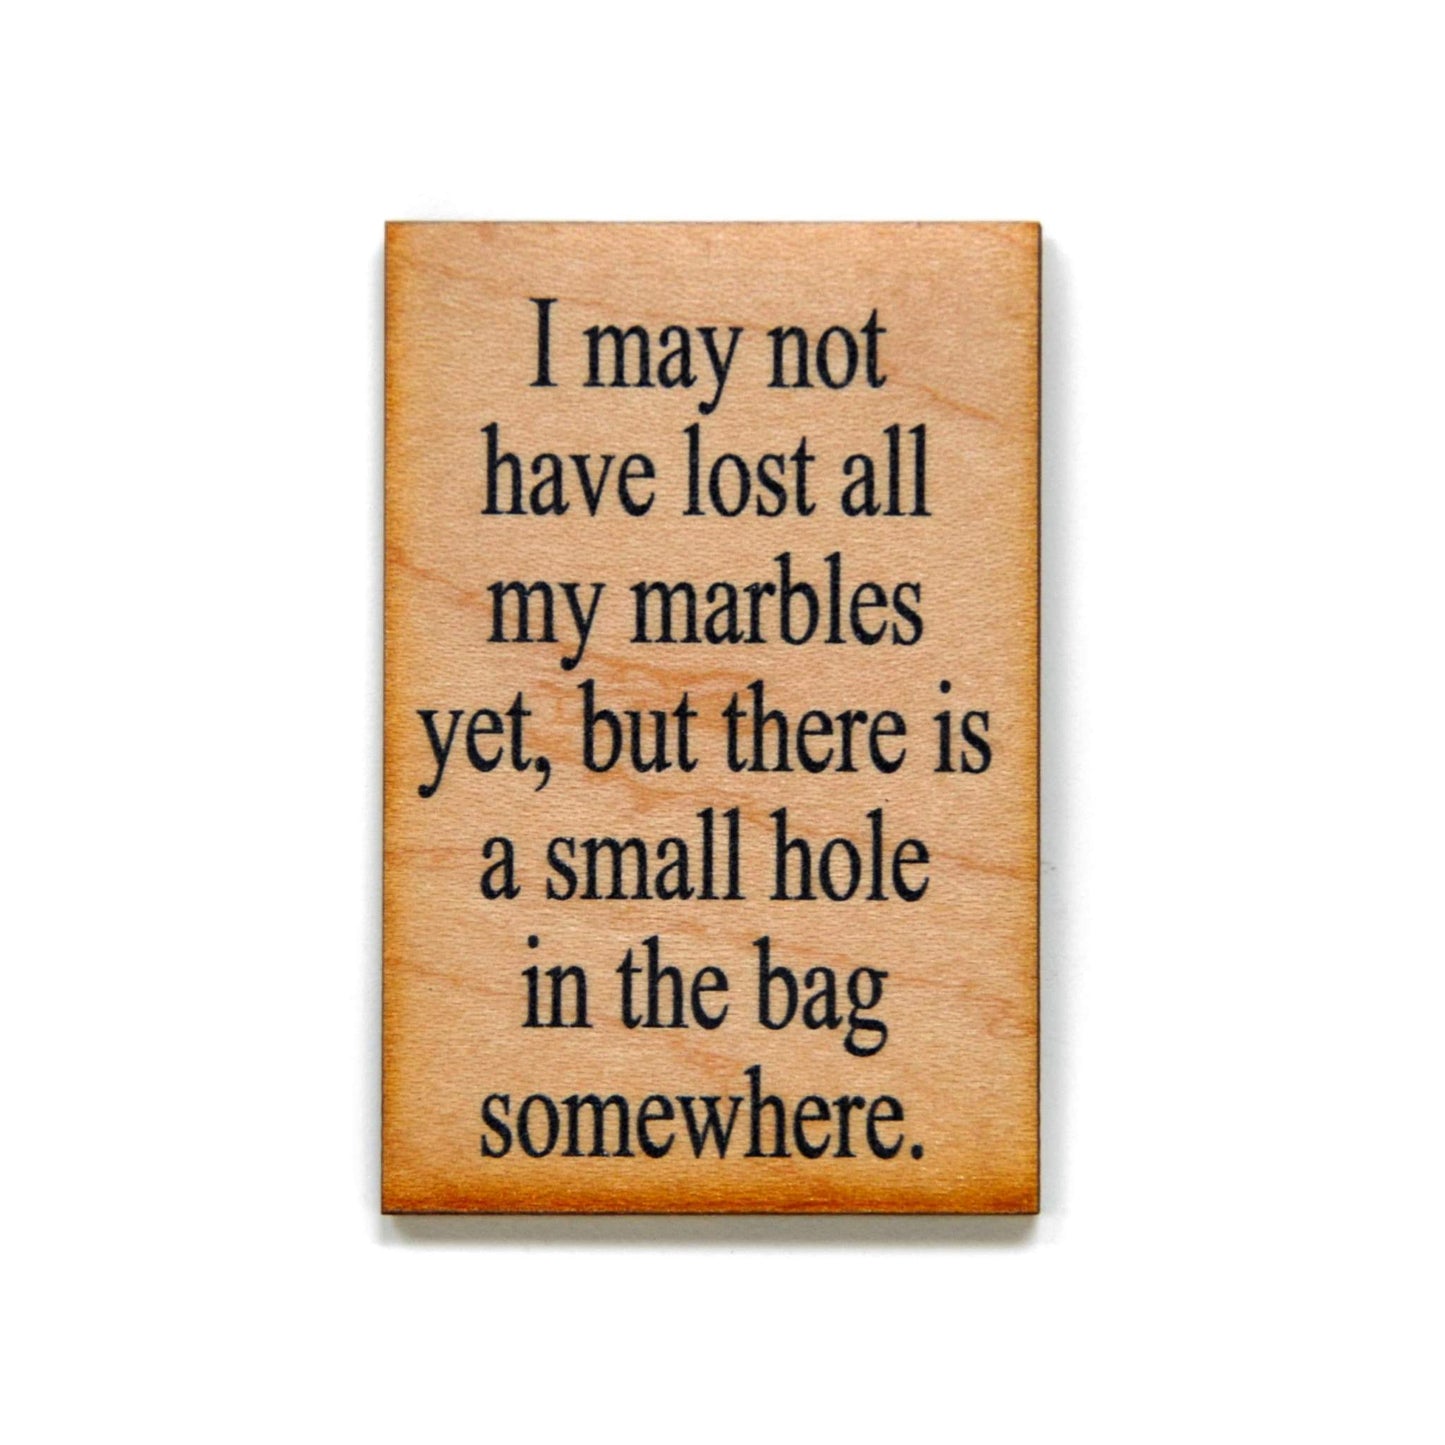 Last Call! I May Not Have Lost All My Marbles Yet Funny Wood Refrigerator Magnet | 2" x 3"